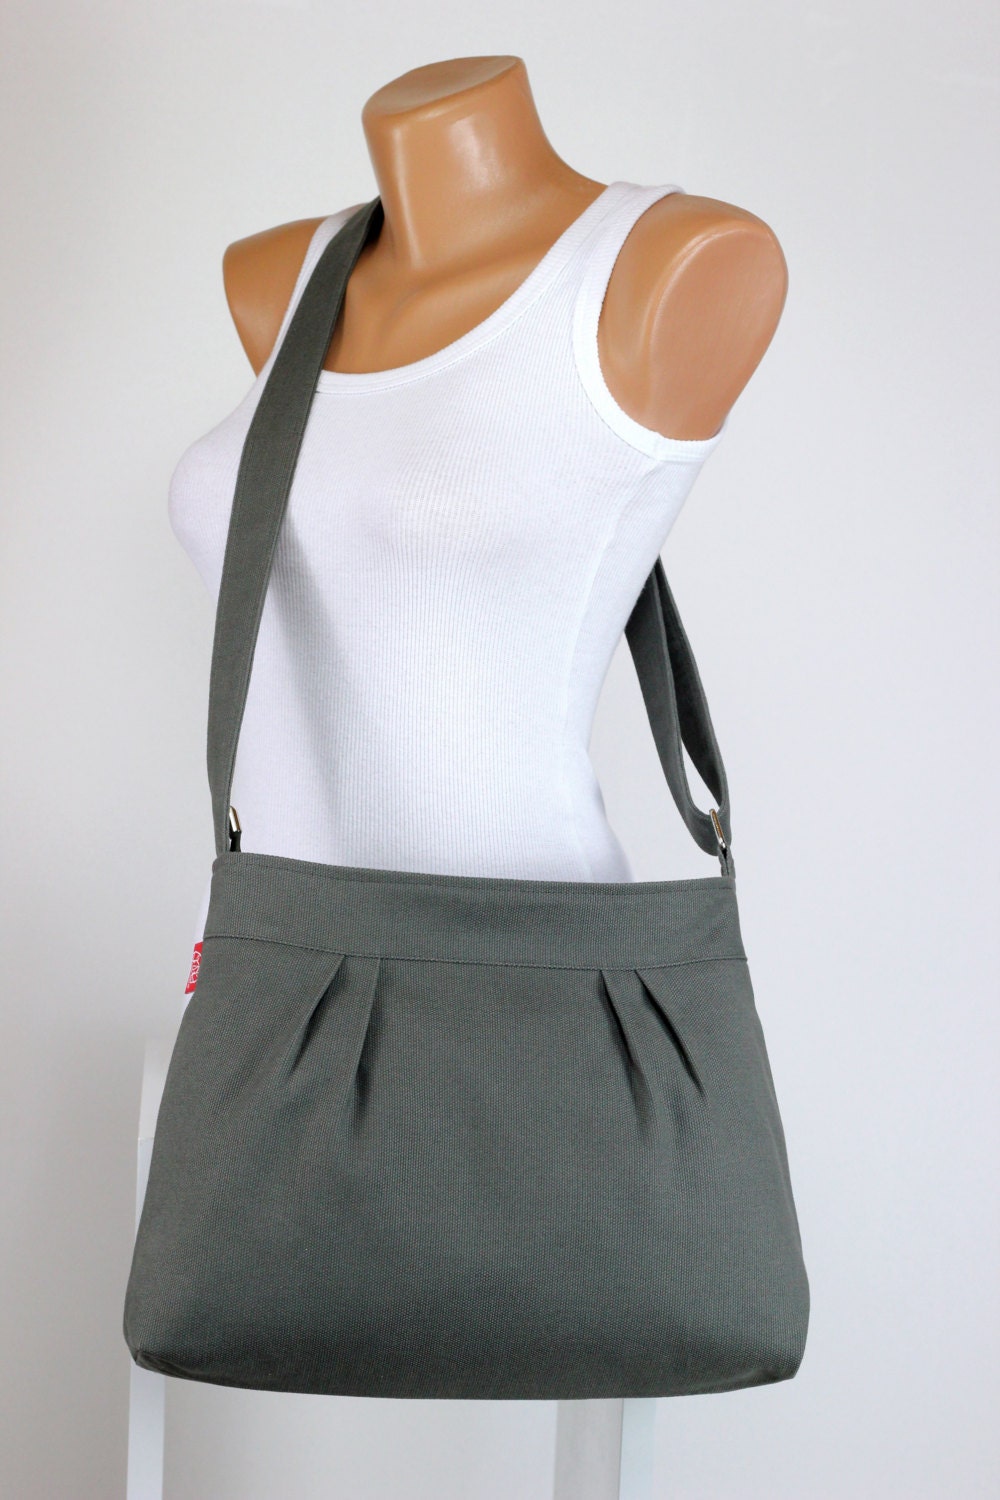 Gray Bag Small Bag Pleated Bag Canvas Purse by hippirhino on Etsy